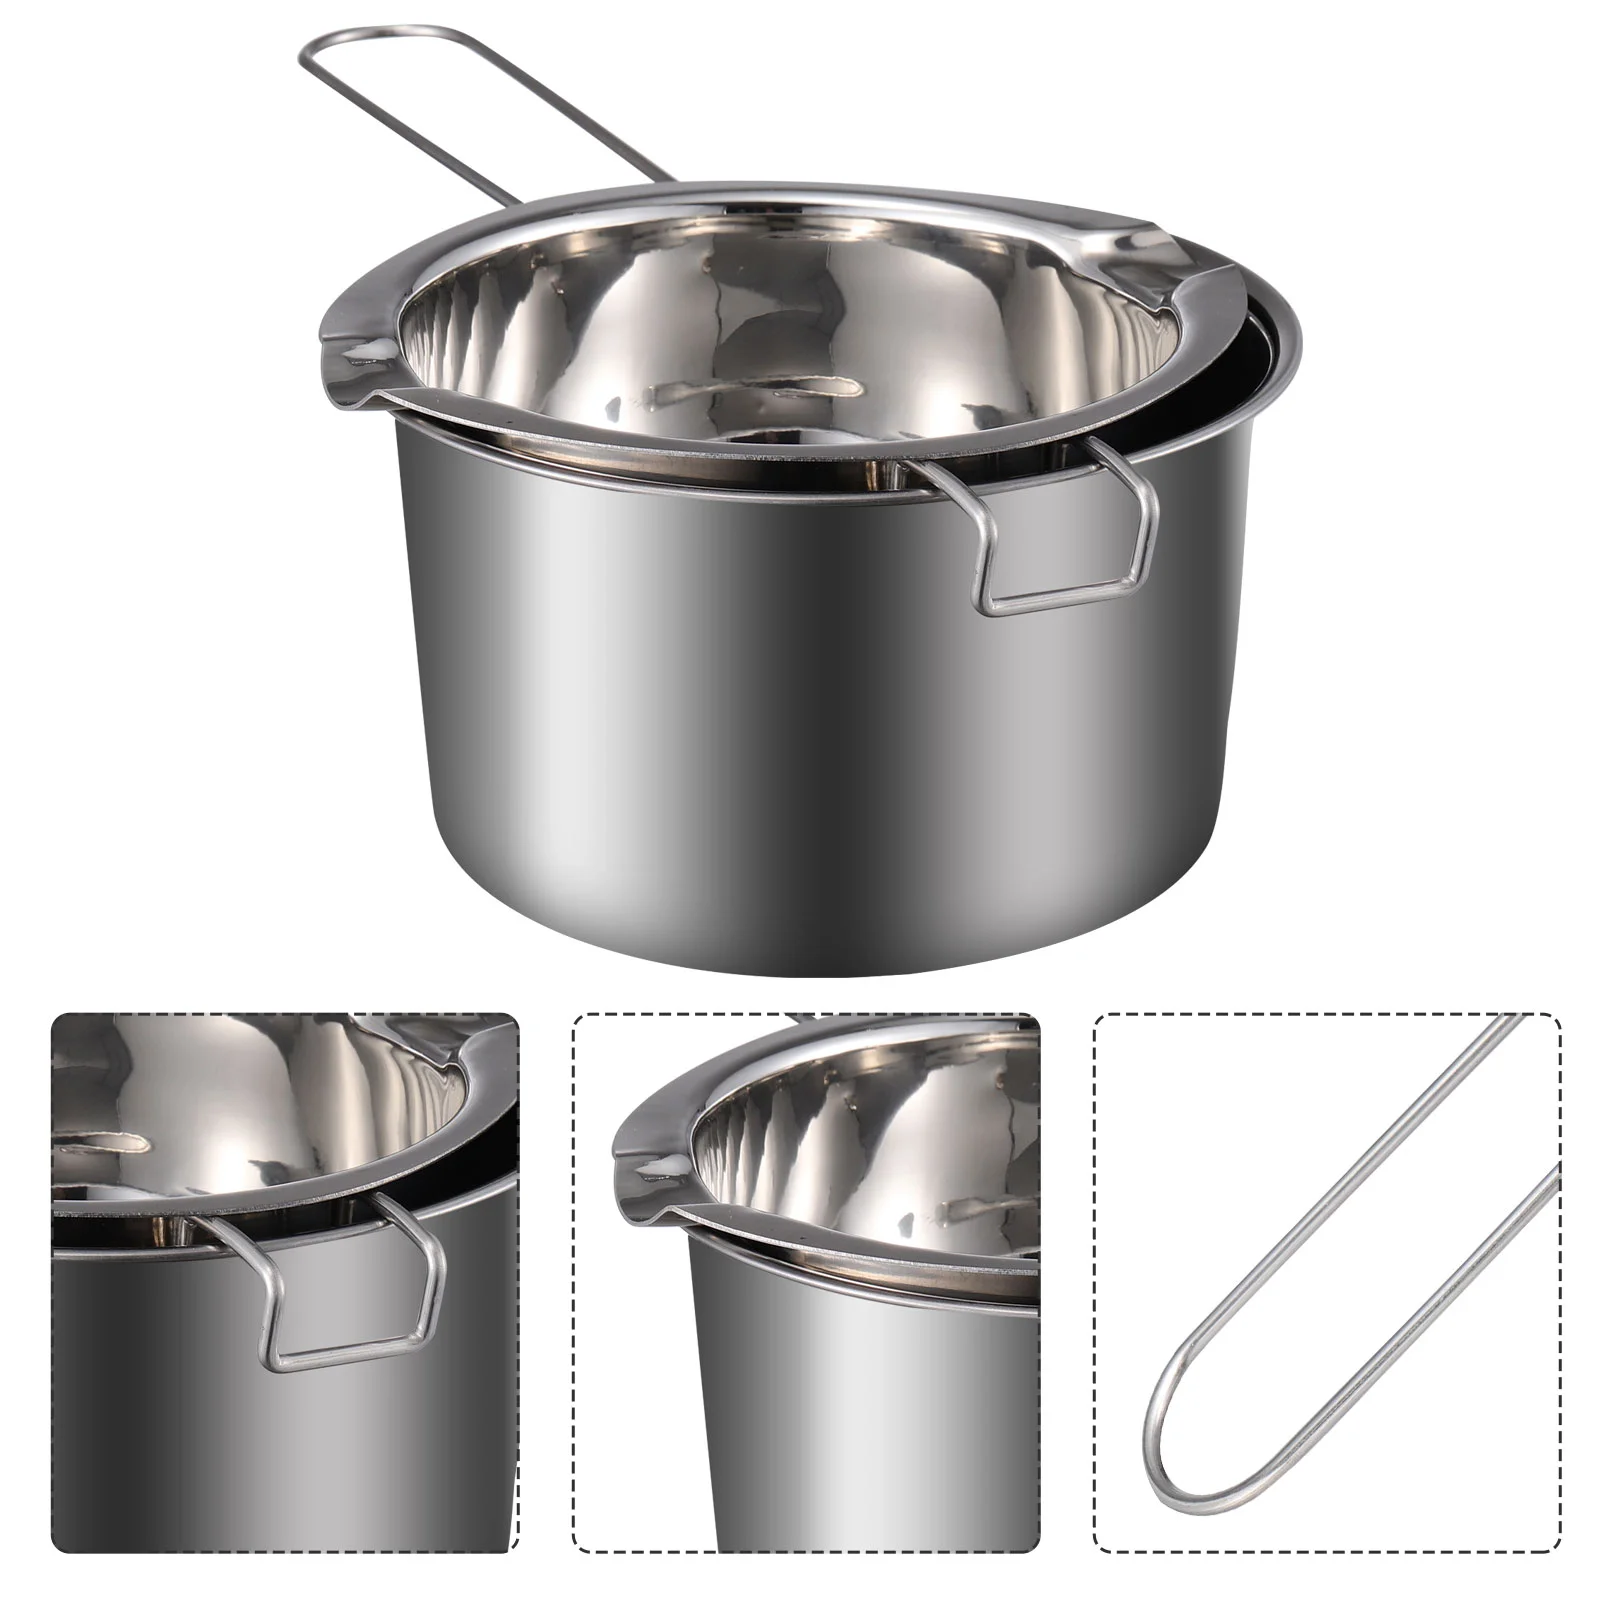 

Pot Melting Boiler Double Chocolatewax Making Candy Stainless Steel Cheese Panbutter Soap Pouring Warmer Melt Bowl Fondue Set